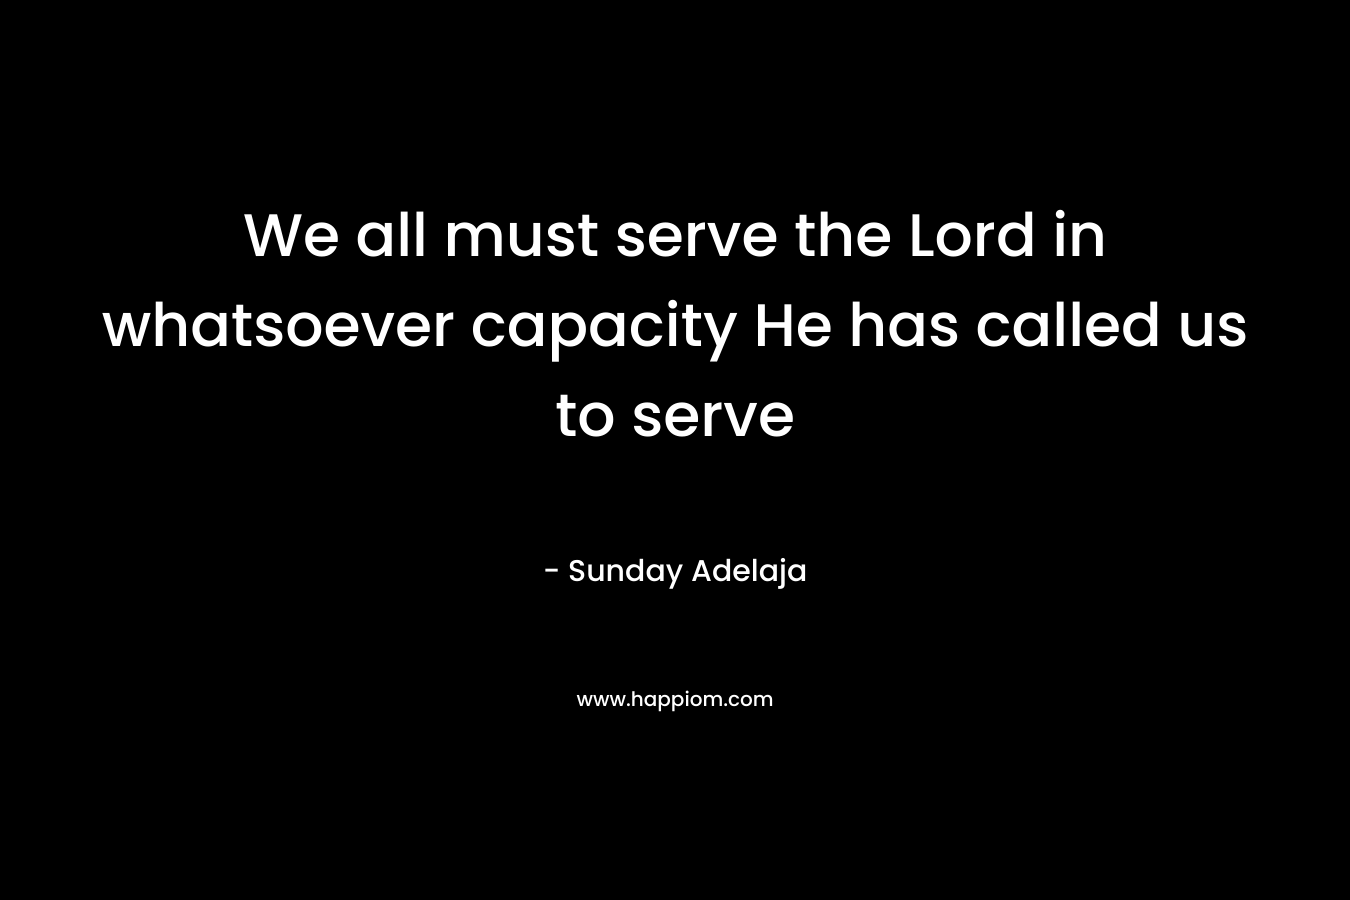 We all must serve the Lord in whatsoever capacity He has called us to serve